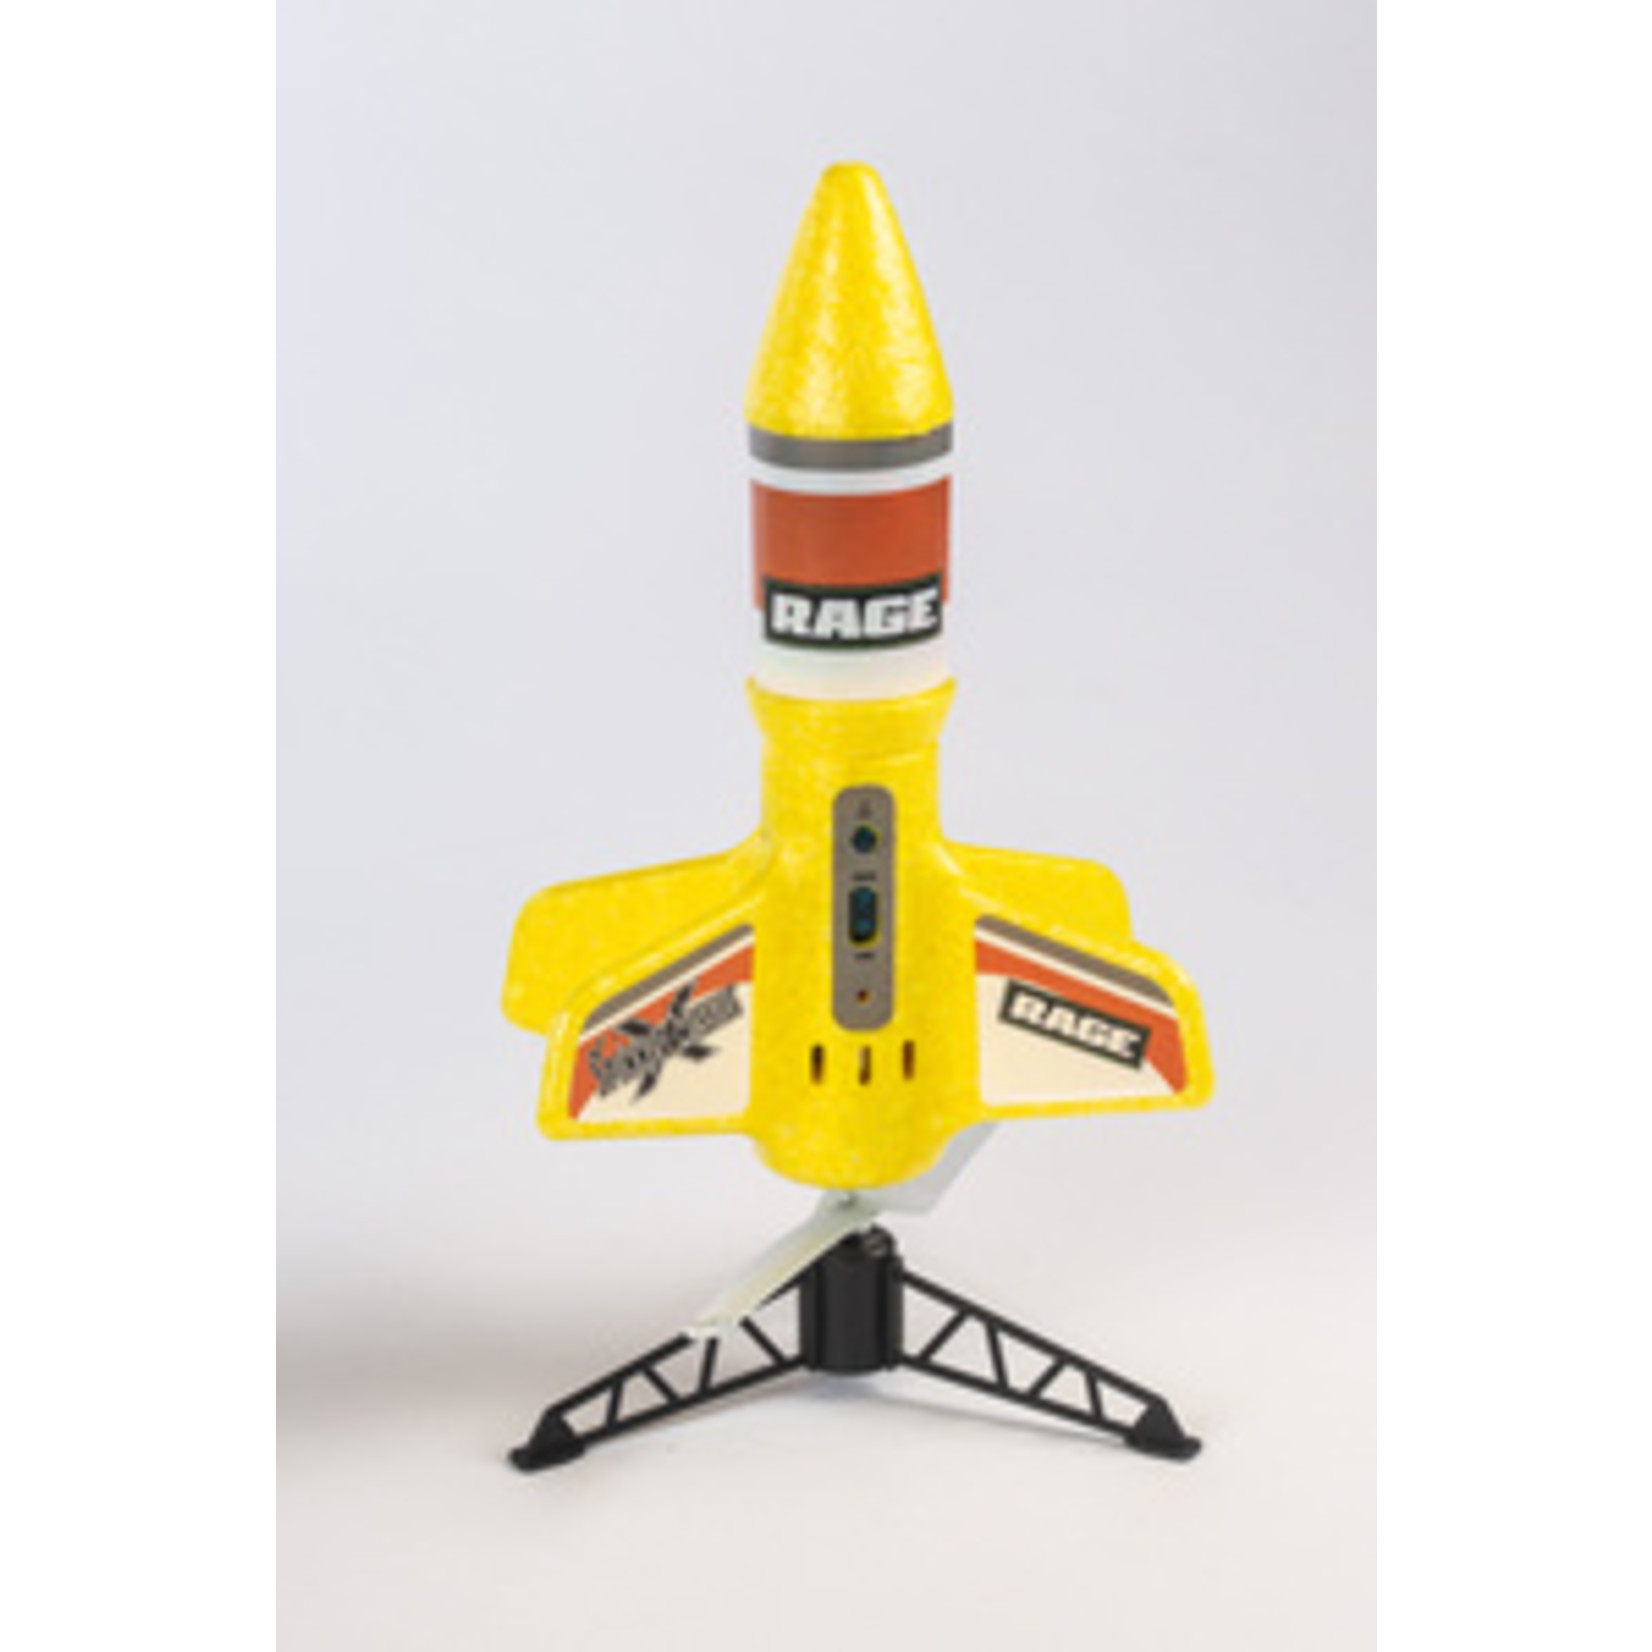 Rage R/C Spinner Missile X - Yellow Electric Free-Flight Rocket